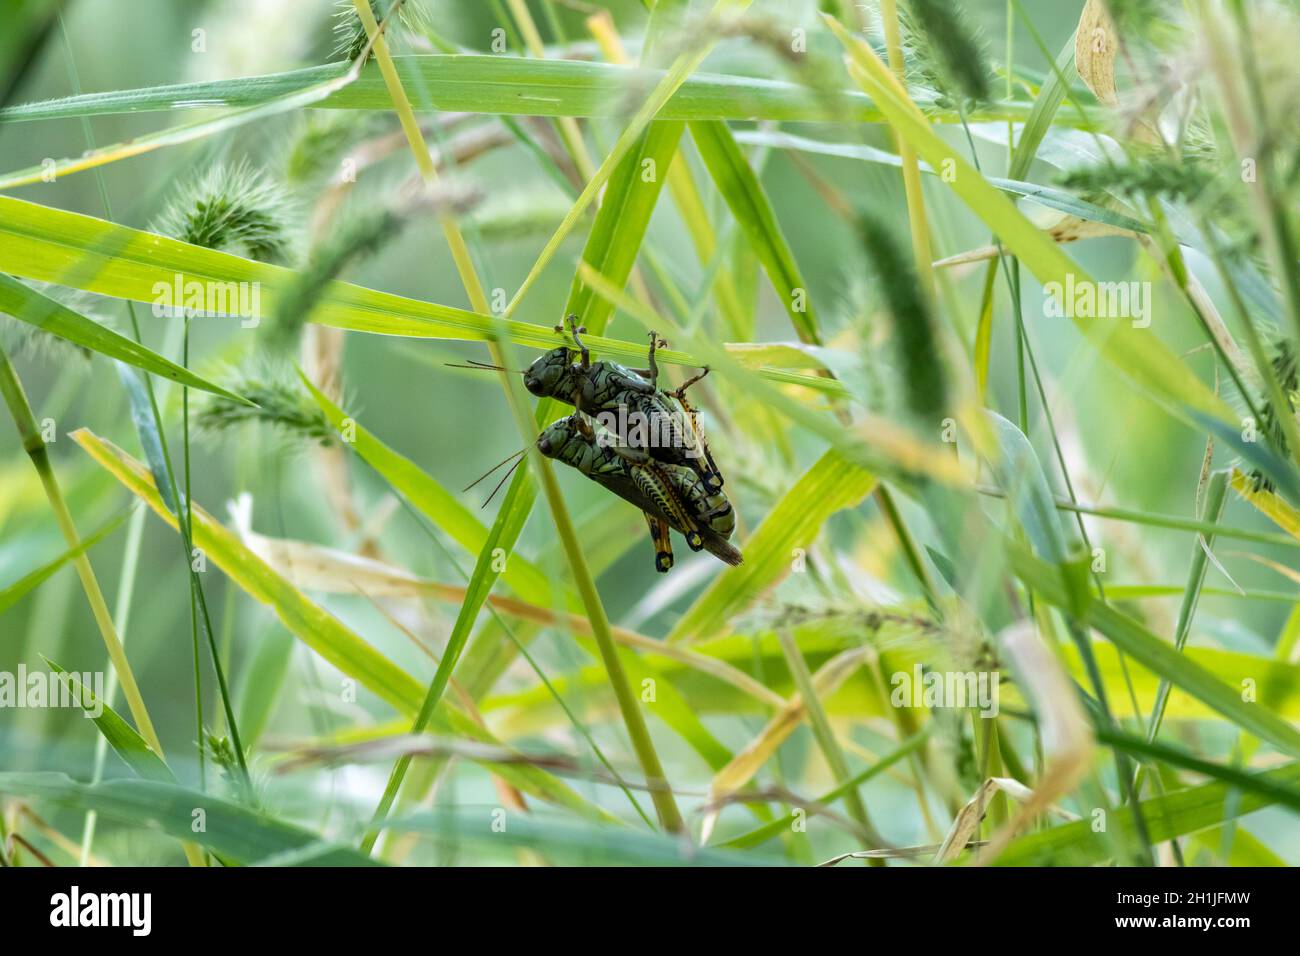 Grasshoppers in late summer mating soft green background Stock Photo